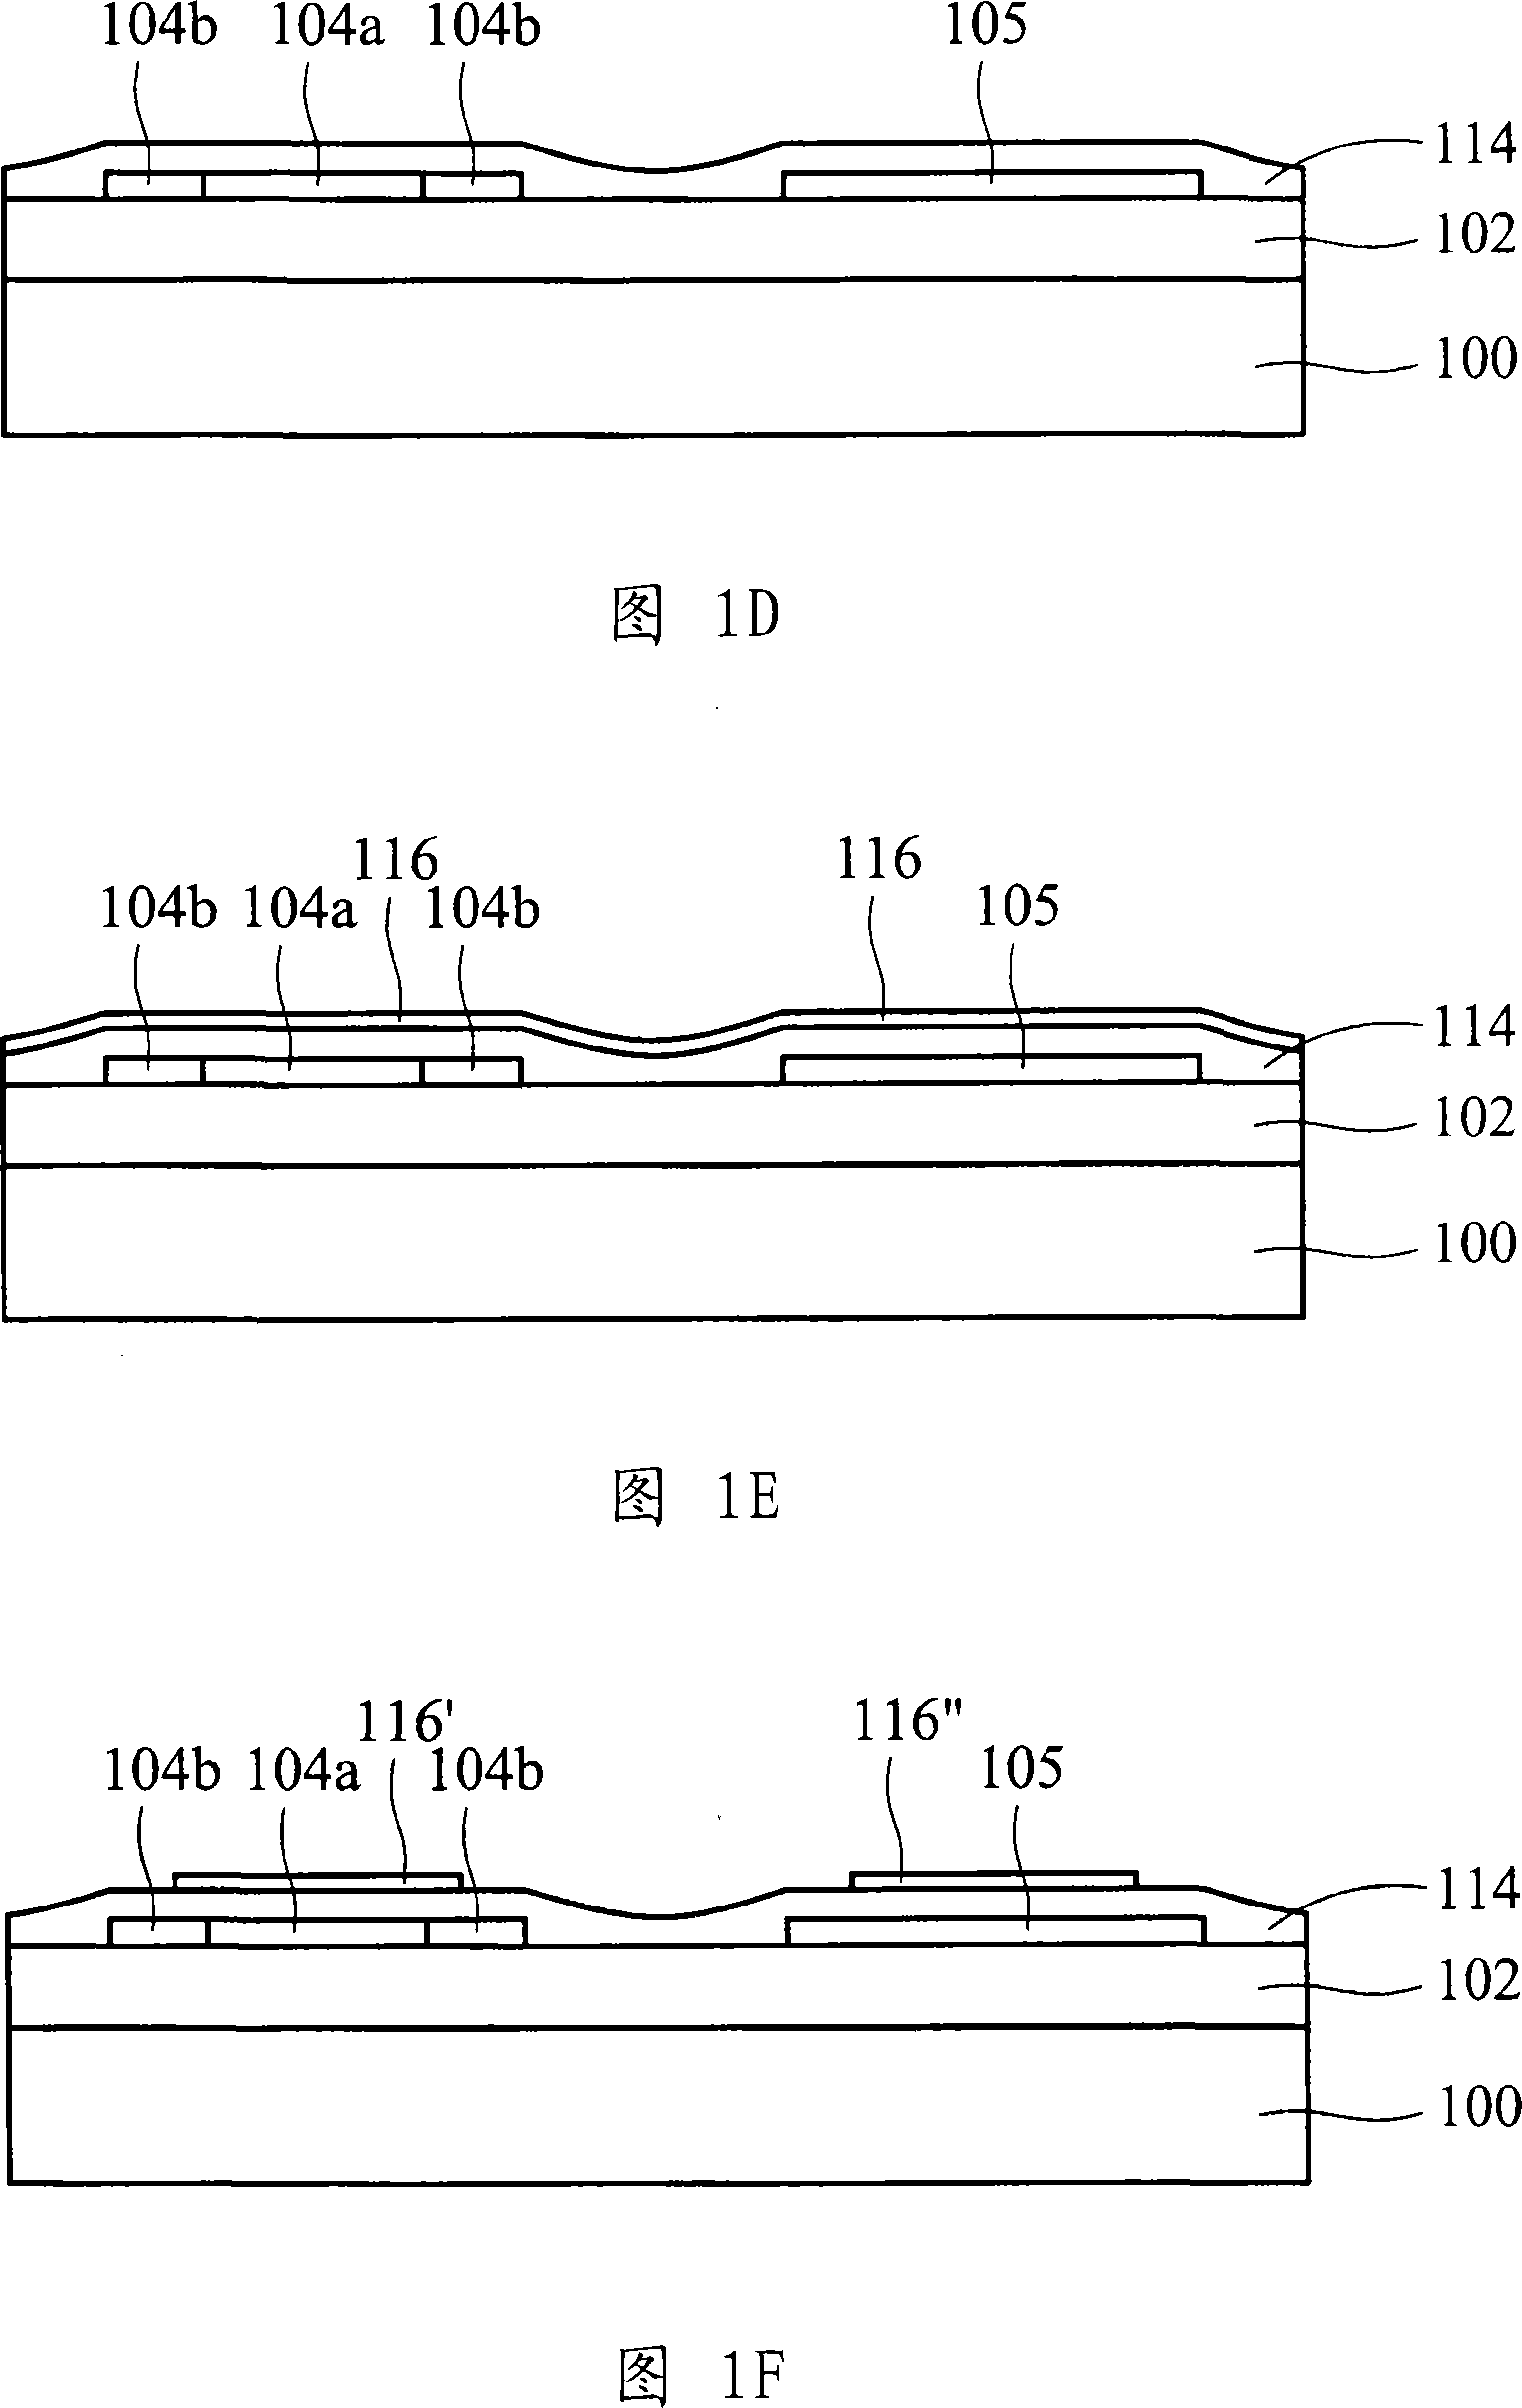 Image display system comprising low temperature poly silicon thin film transistor and its manufacture method